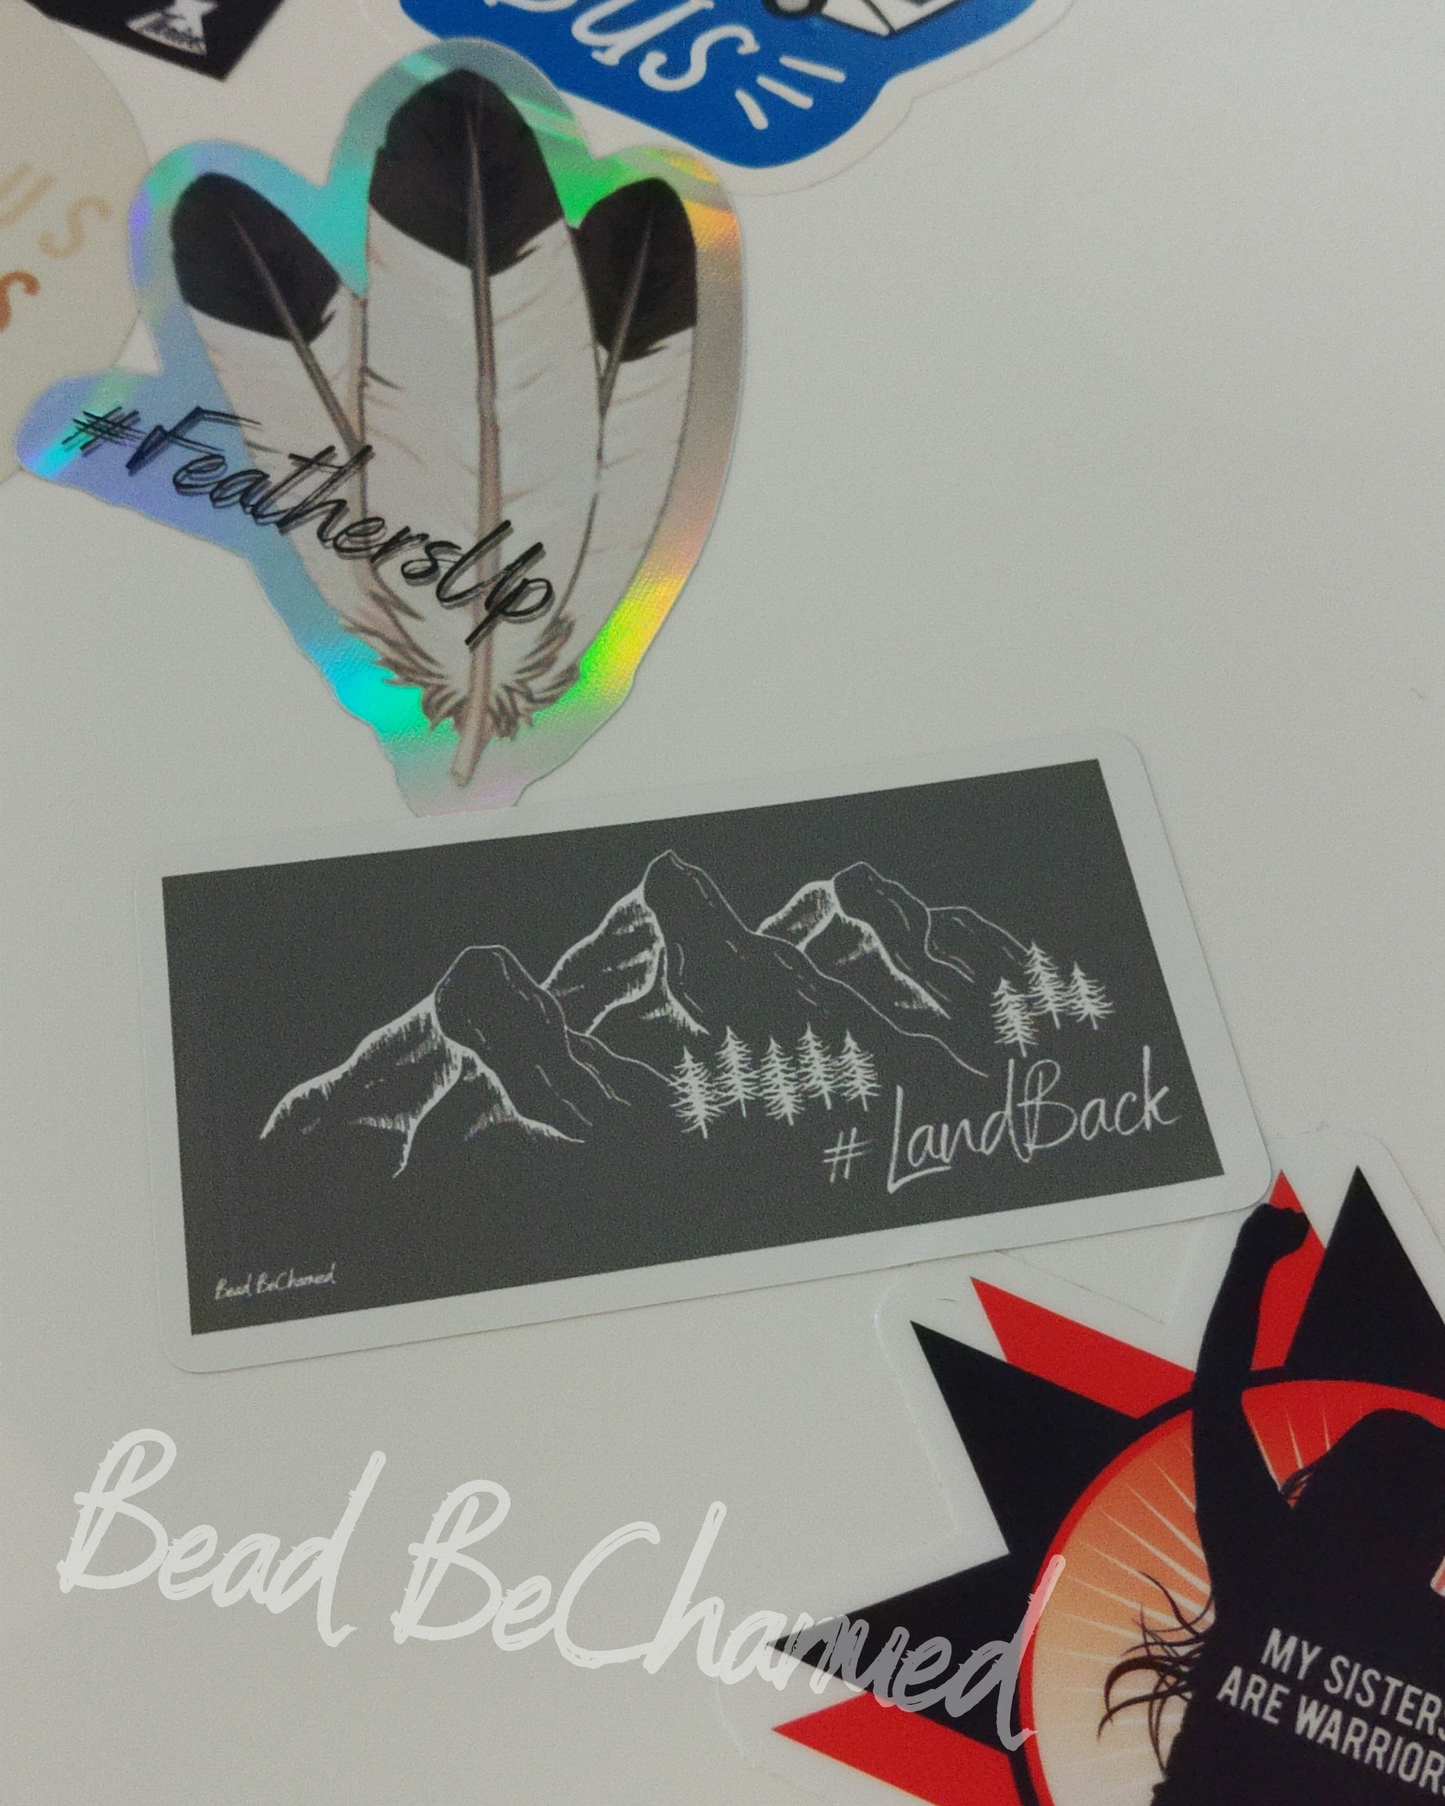 Stickers, 'Land Back' - Kiss-Cut Vinyl Stickers, Indigenous Justice Awareness Sticker